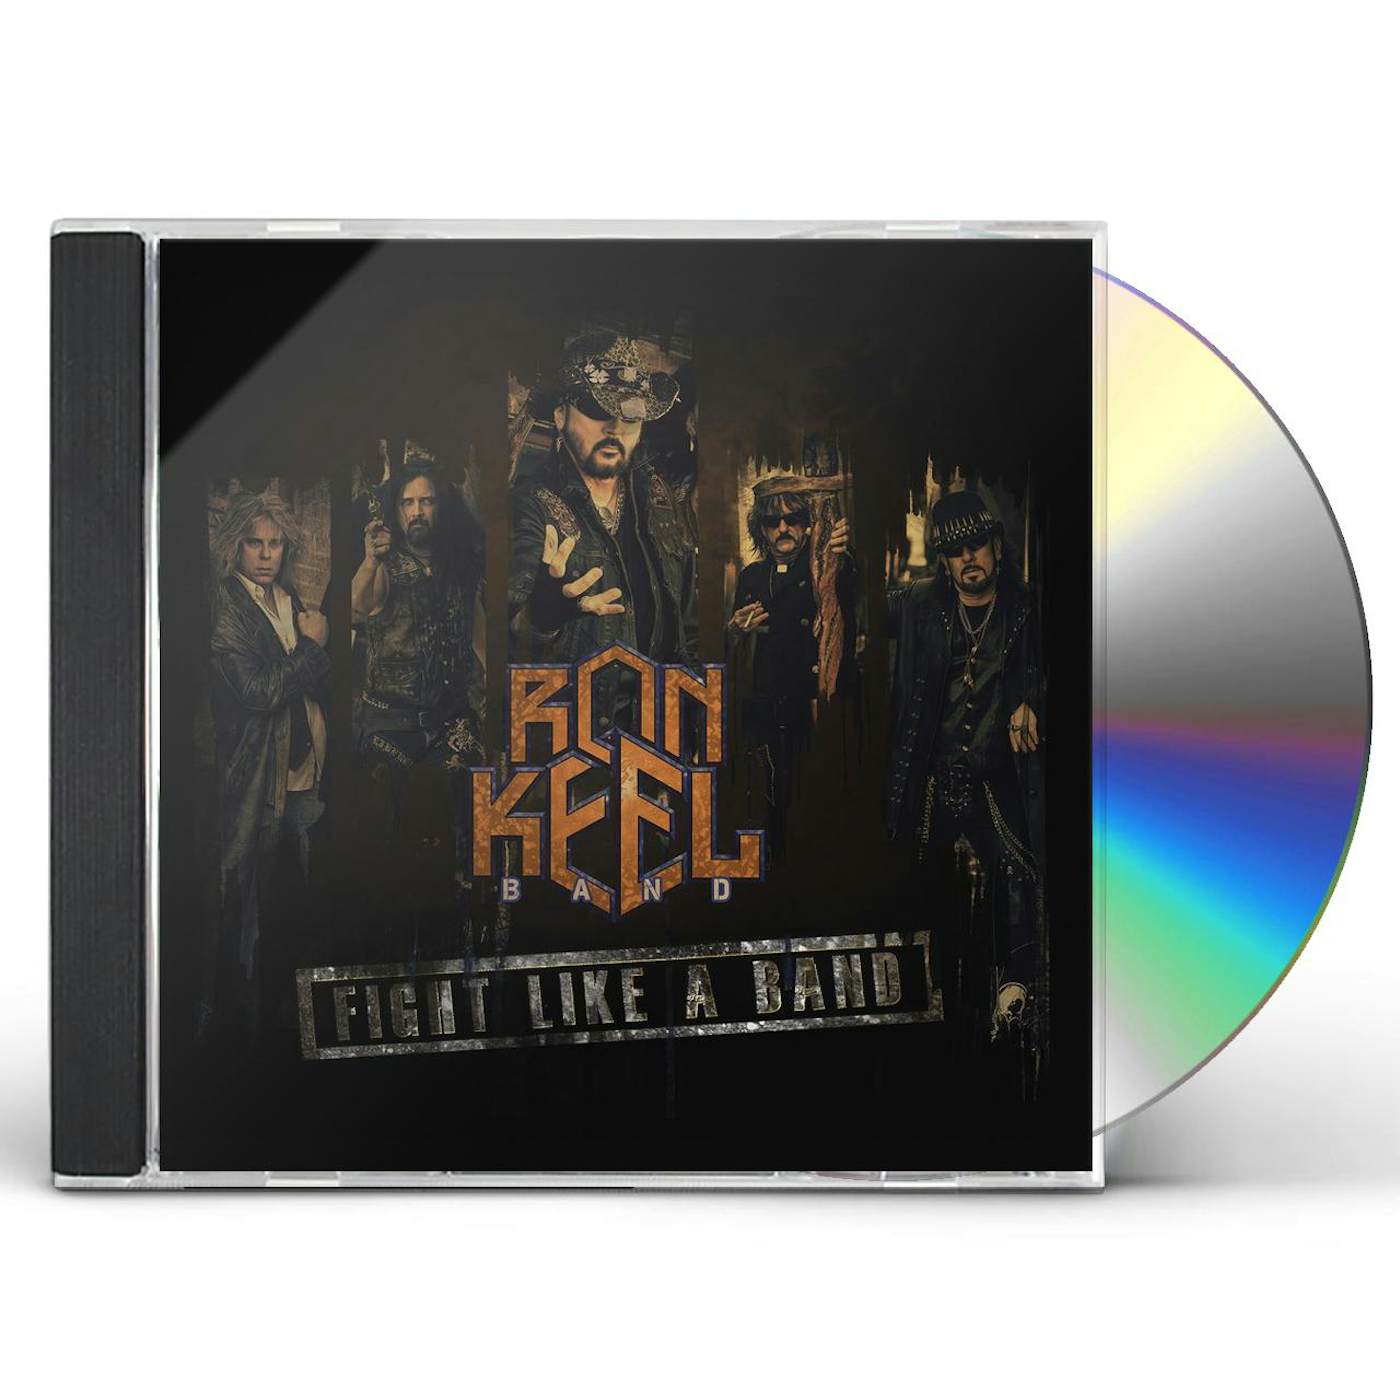 Ron Keel FIGHT LIKE A BAND CD